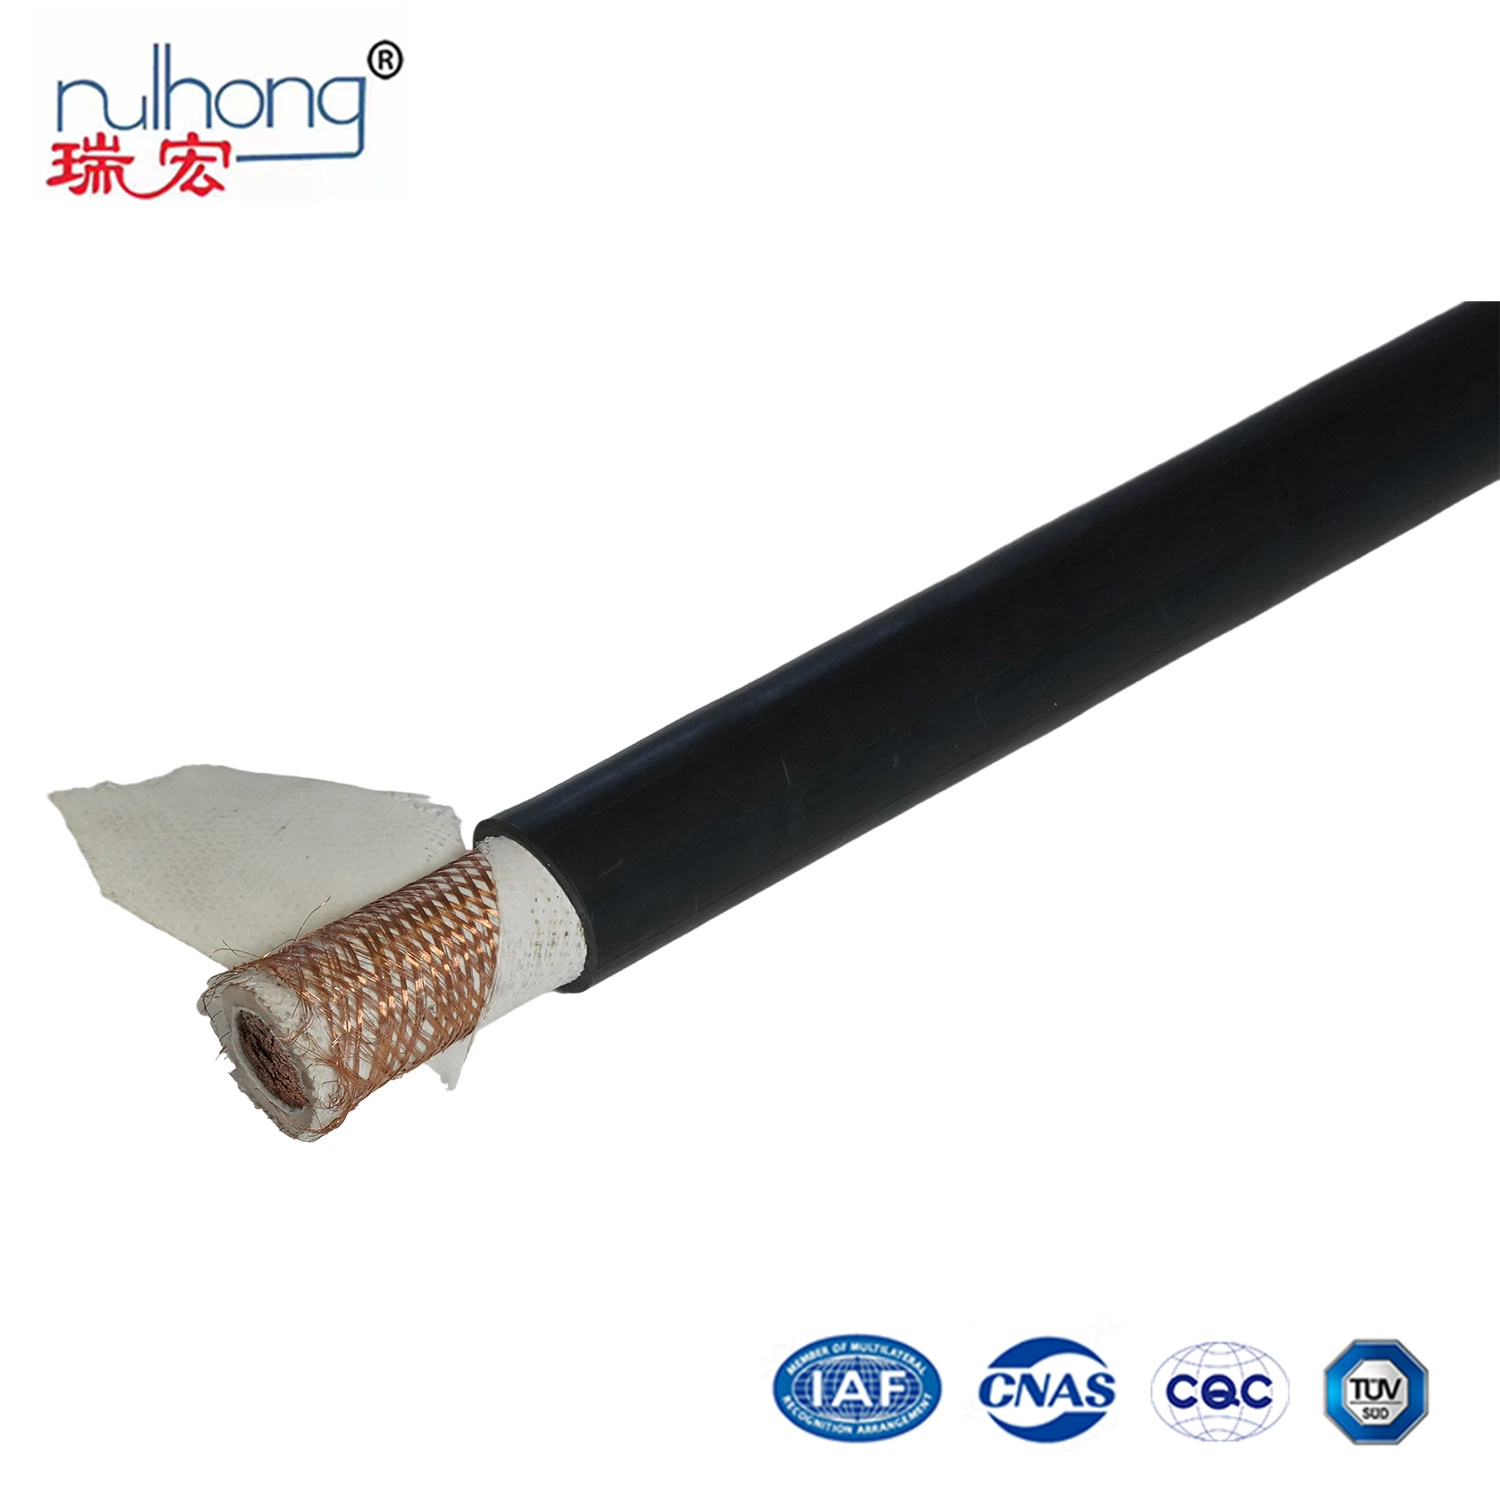 0.6/1kv Three Core XLPE Insulated PVC Sheathed Variable Frequency Flexible Cable with Braided Double Shielding